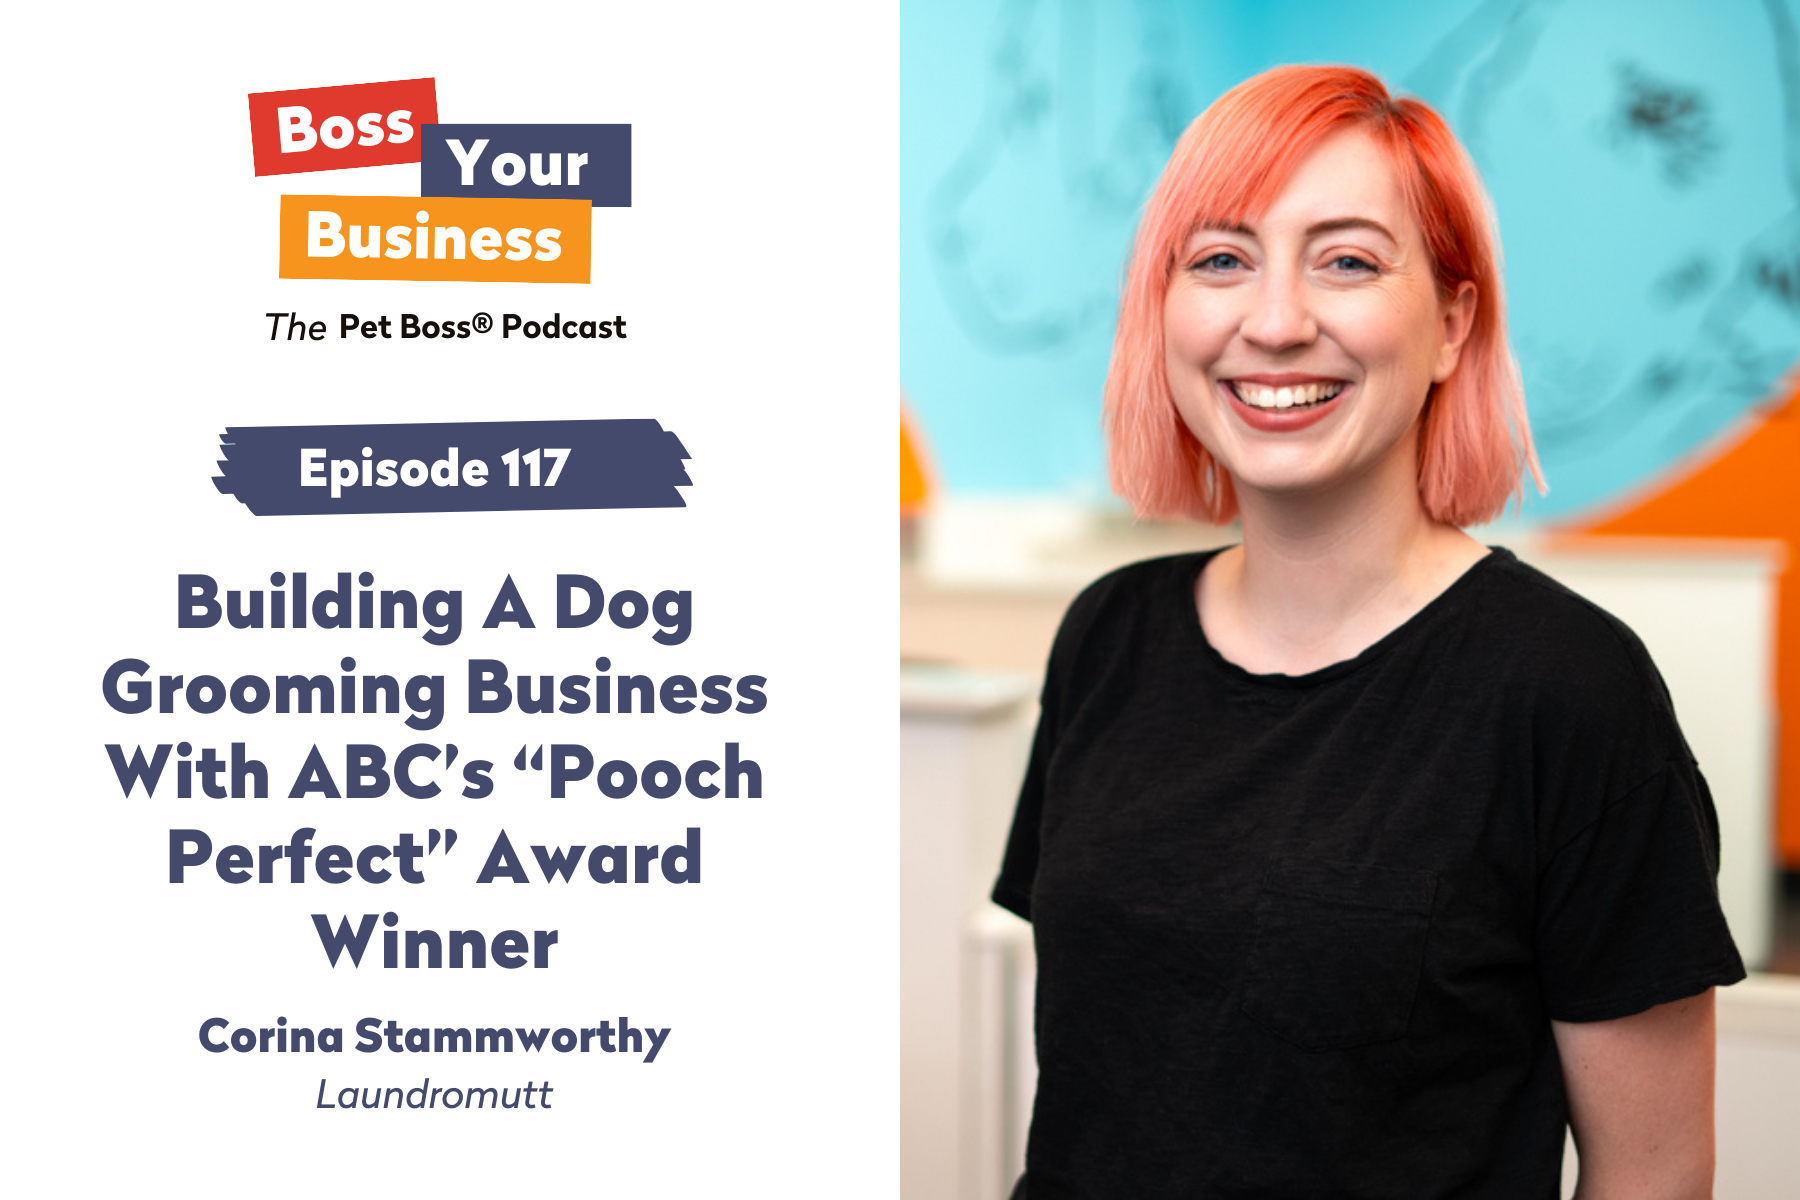 Episode 117 I Building A Dog Grooming Business With ABC's "Pooch Perfect" Award Winner